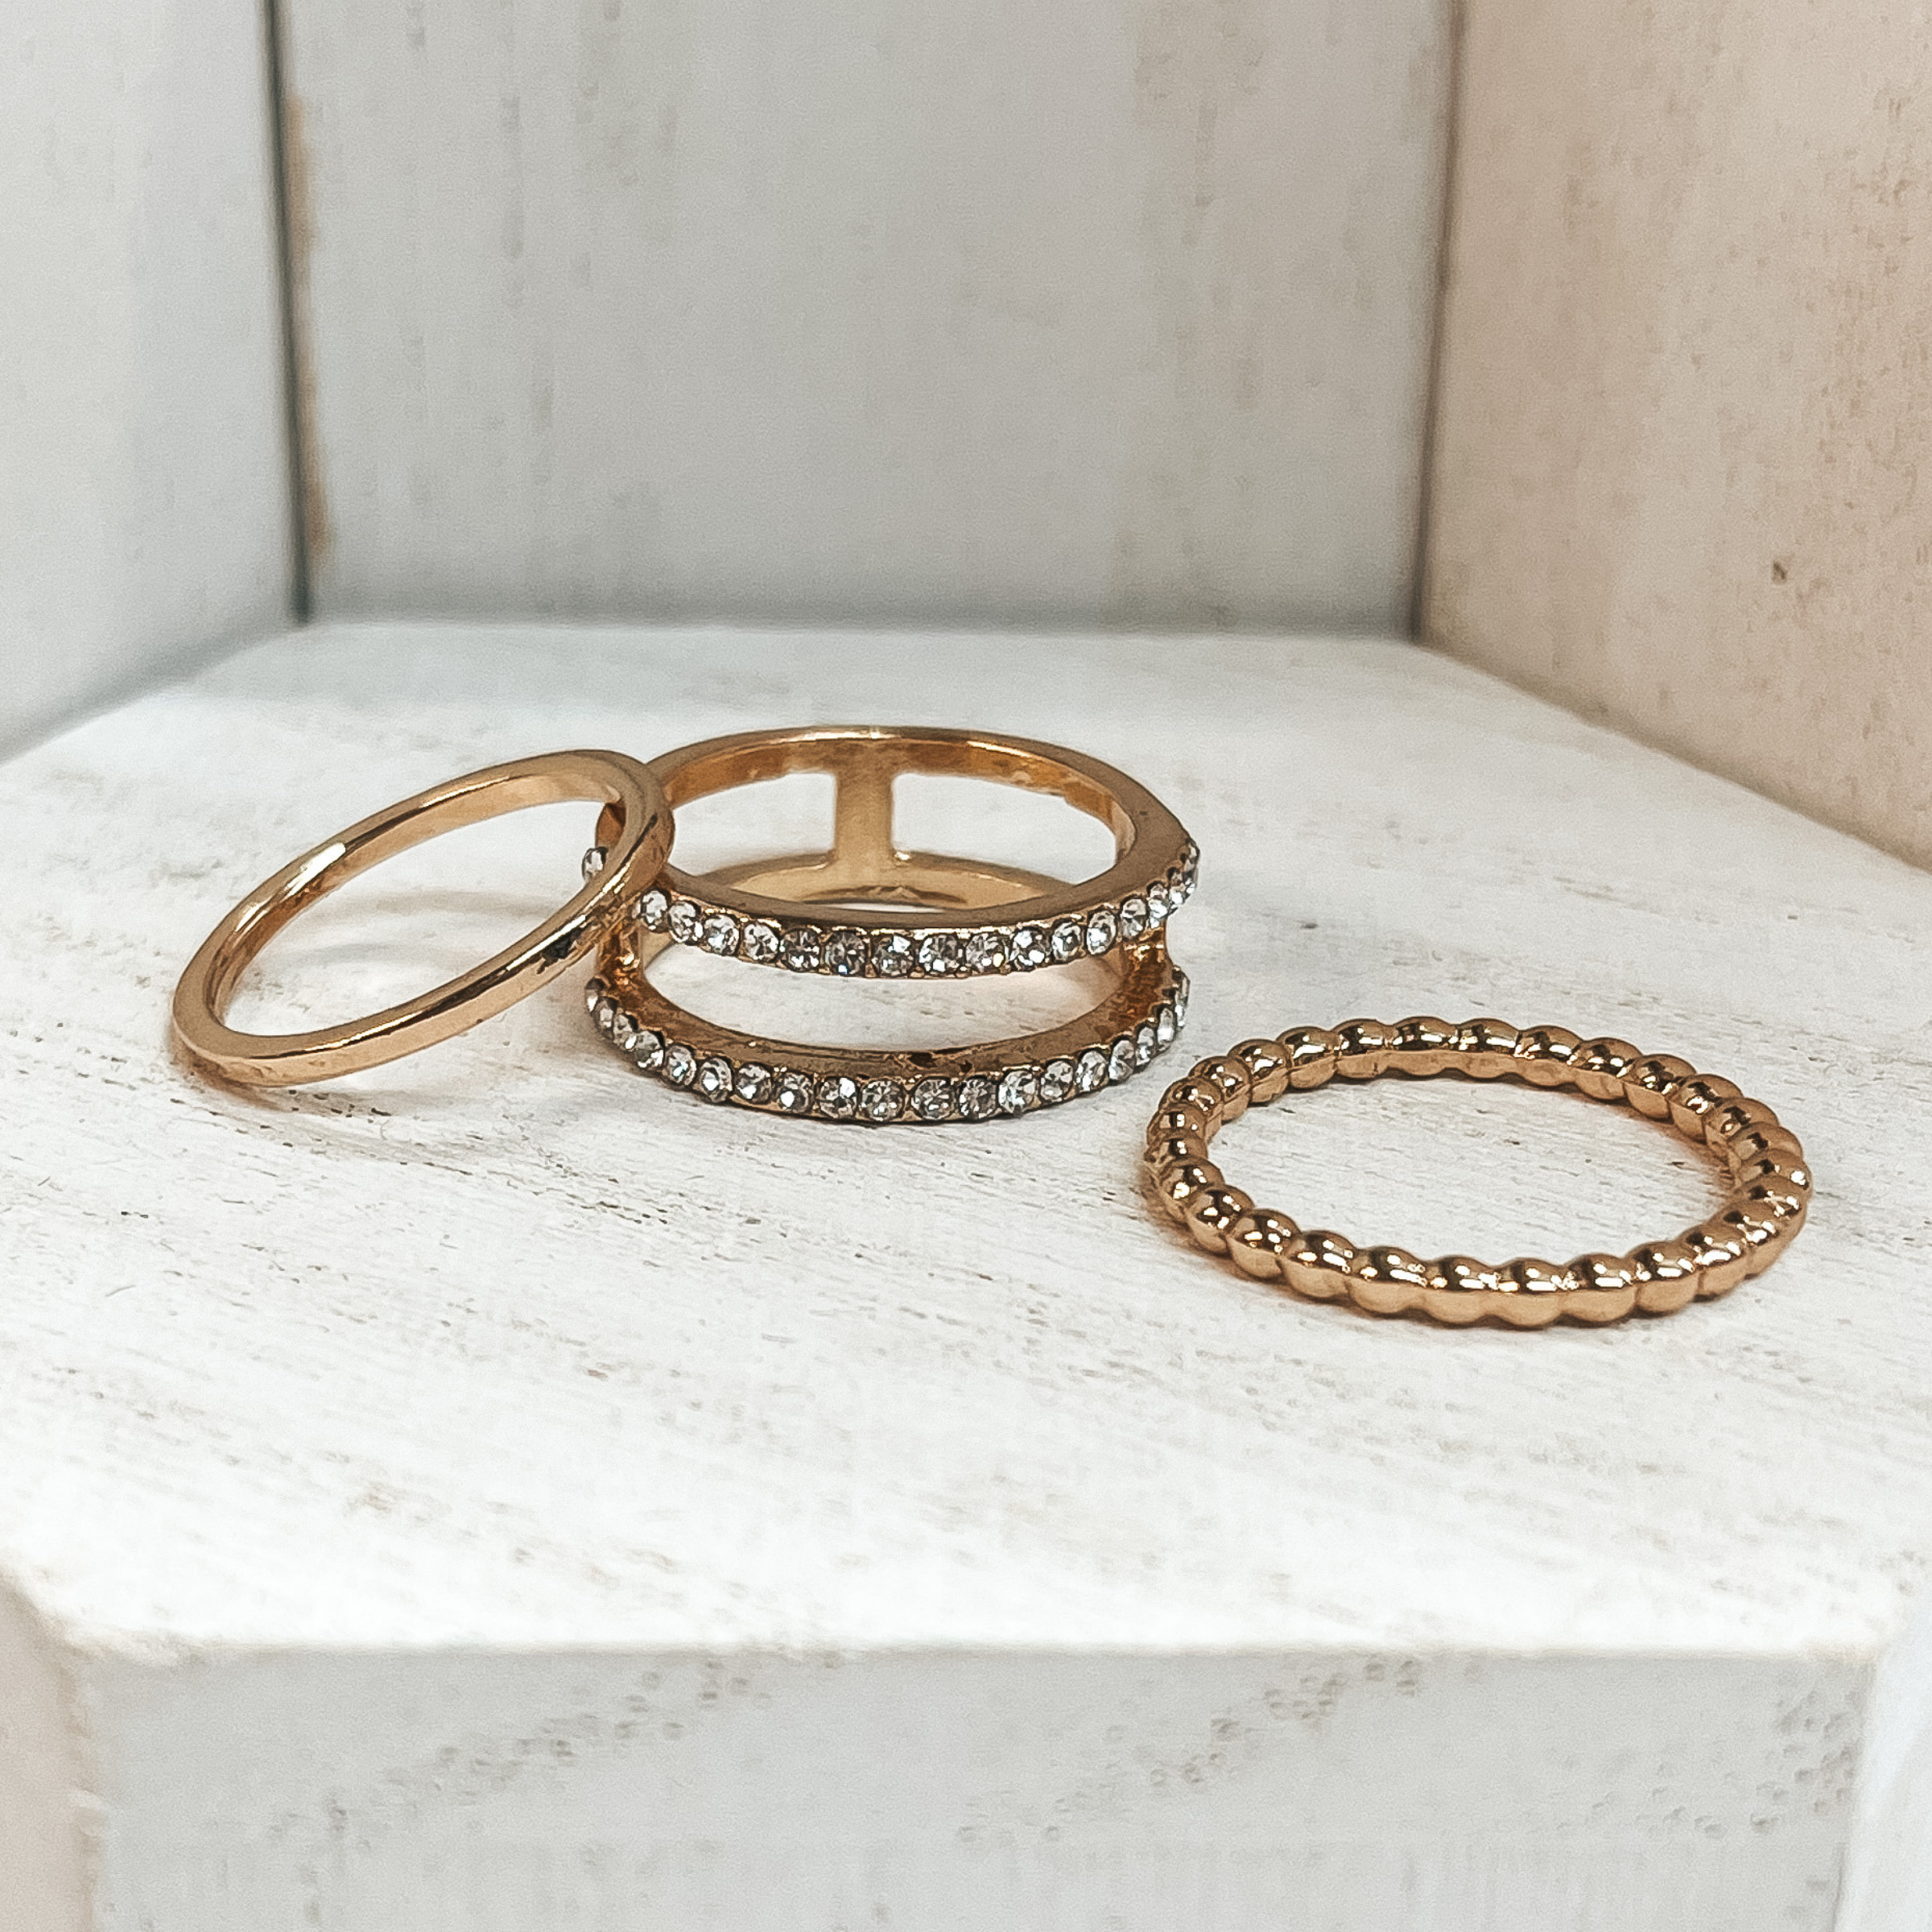 Set of 5 | Multi Textured Ring Set in Gold Tone with Clear CZ Crystals - Giddy Up Glamour Boutique